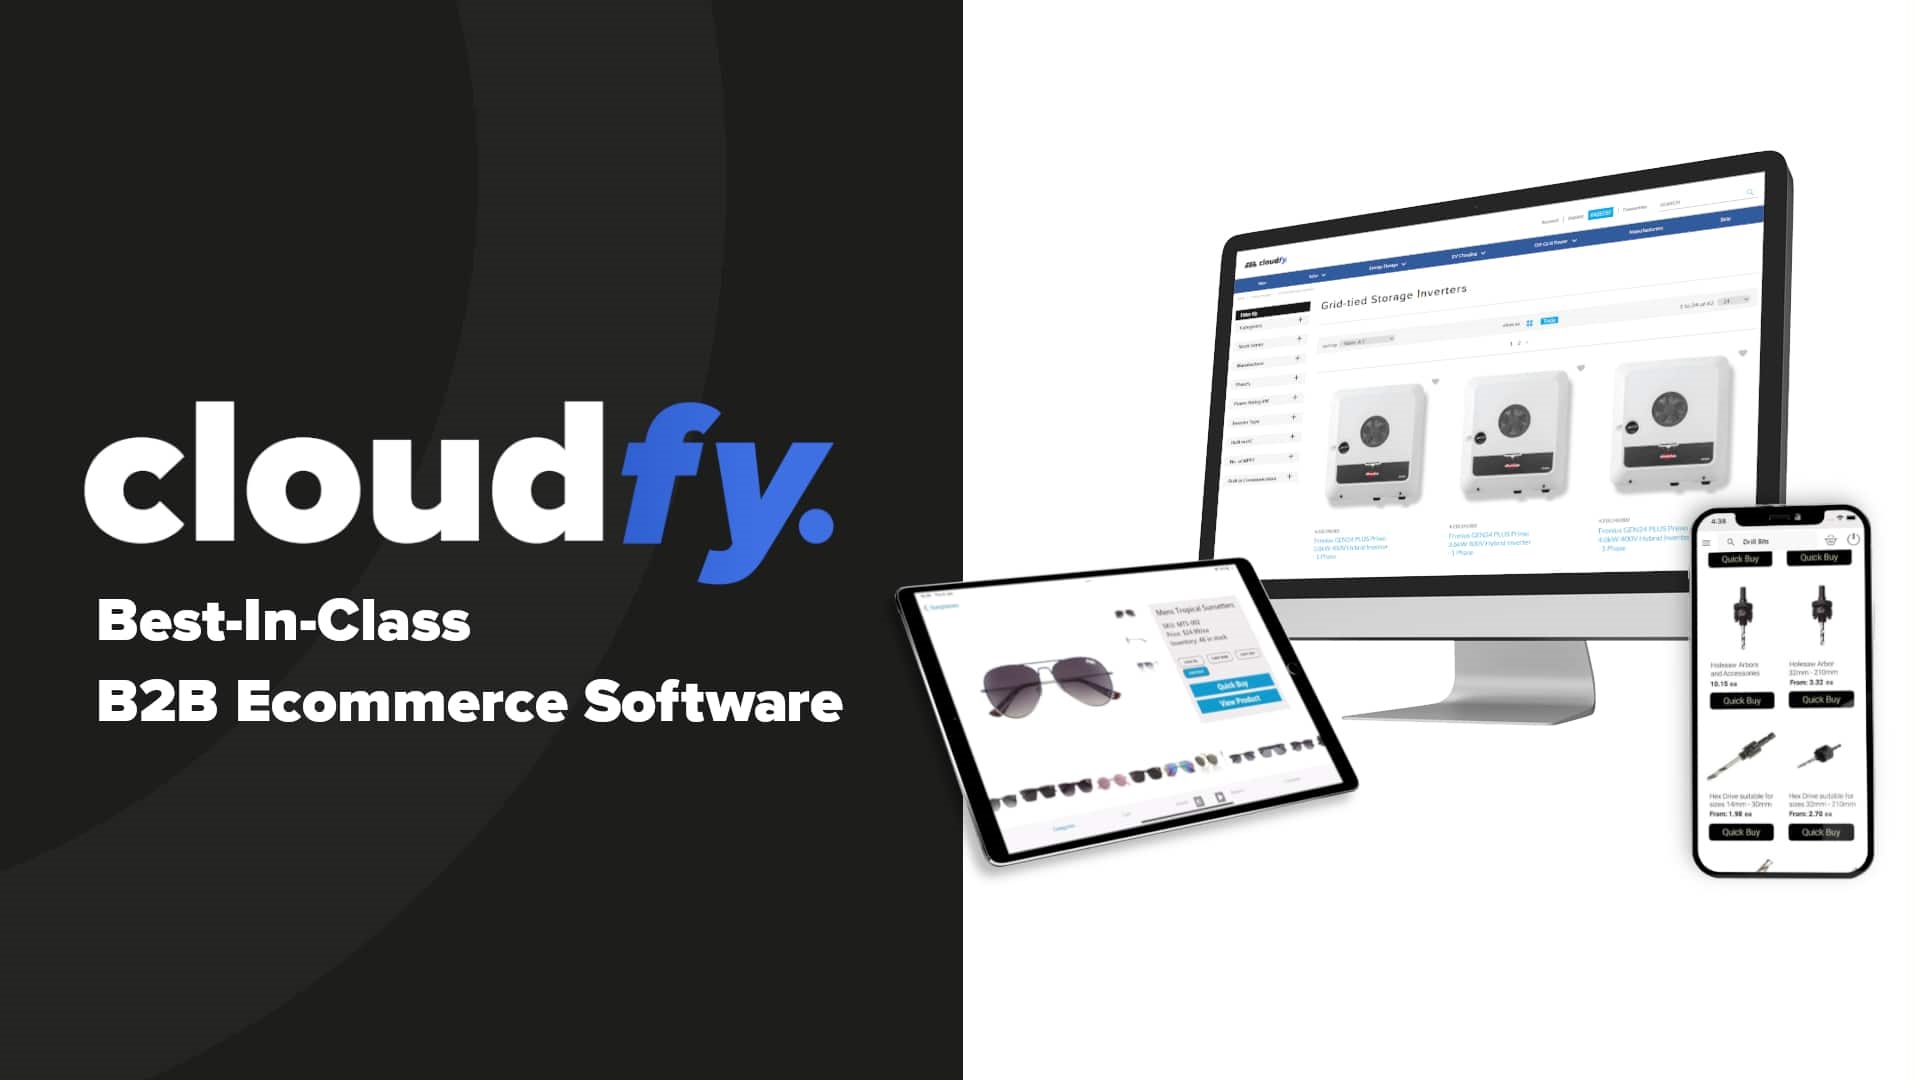 Cloudfy B2B Ecommerce Software Solutions